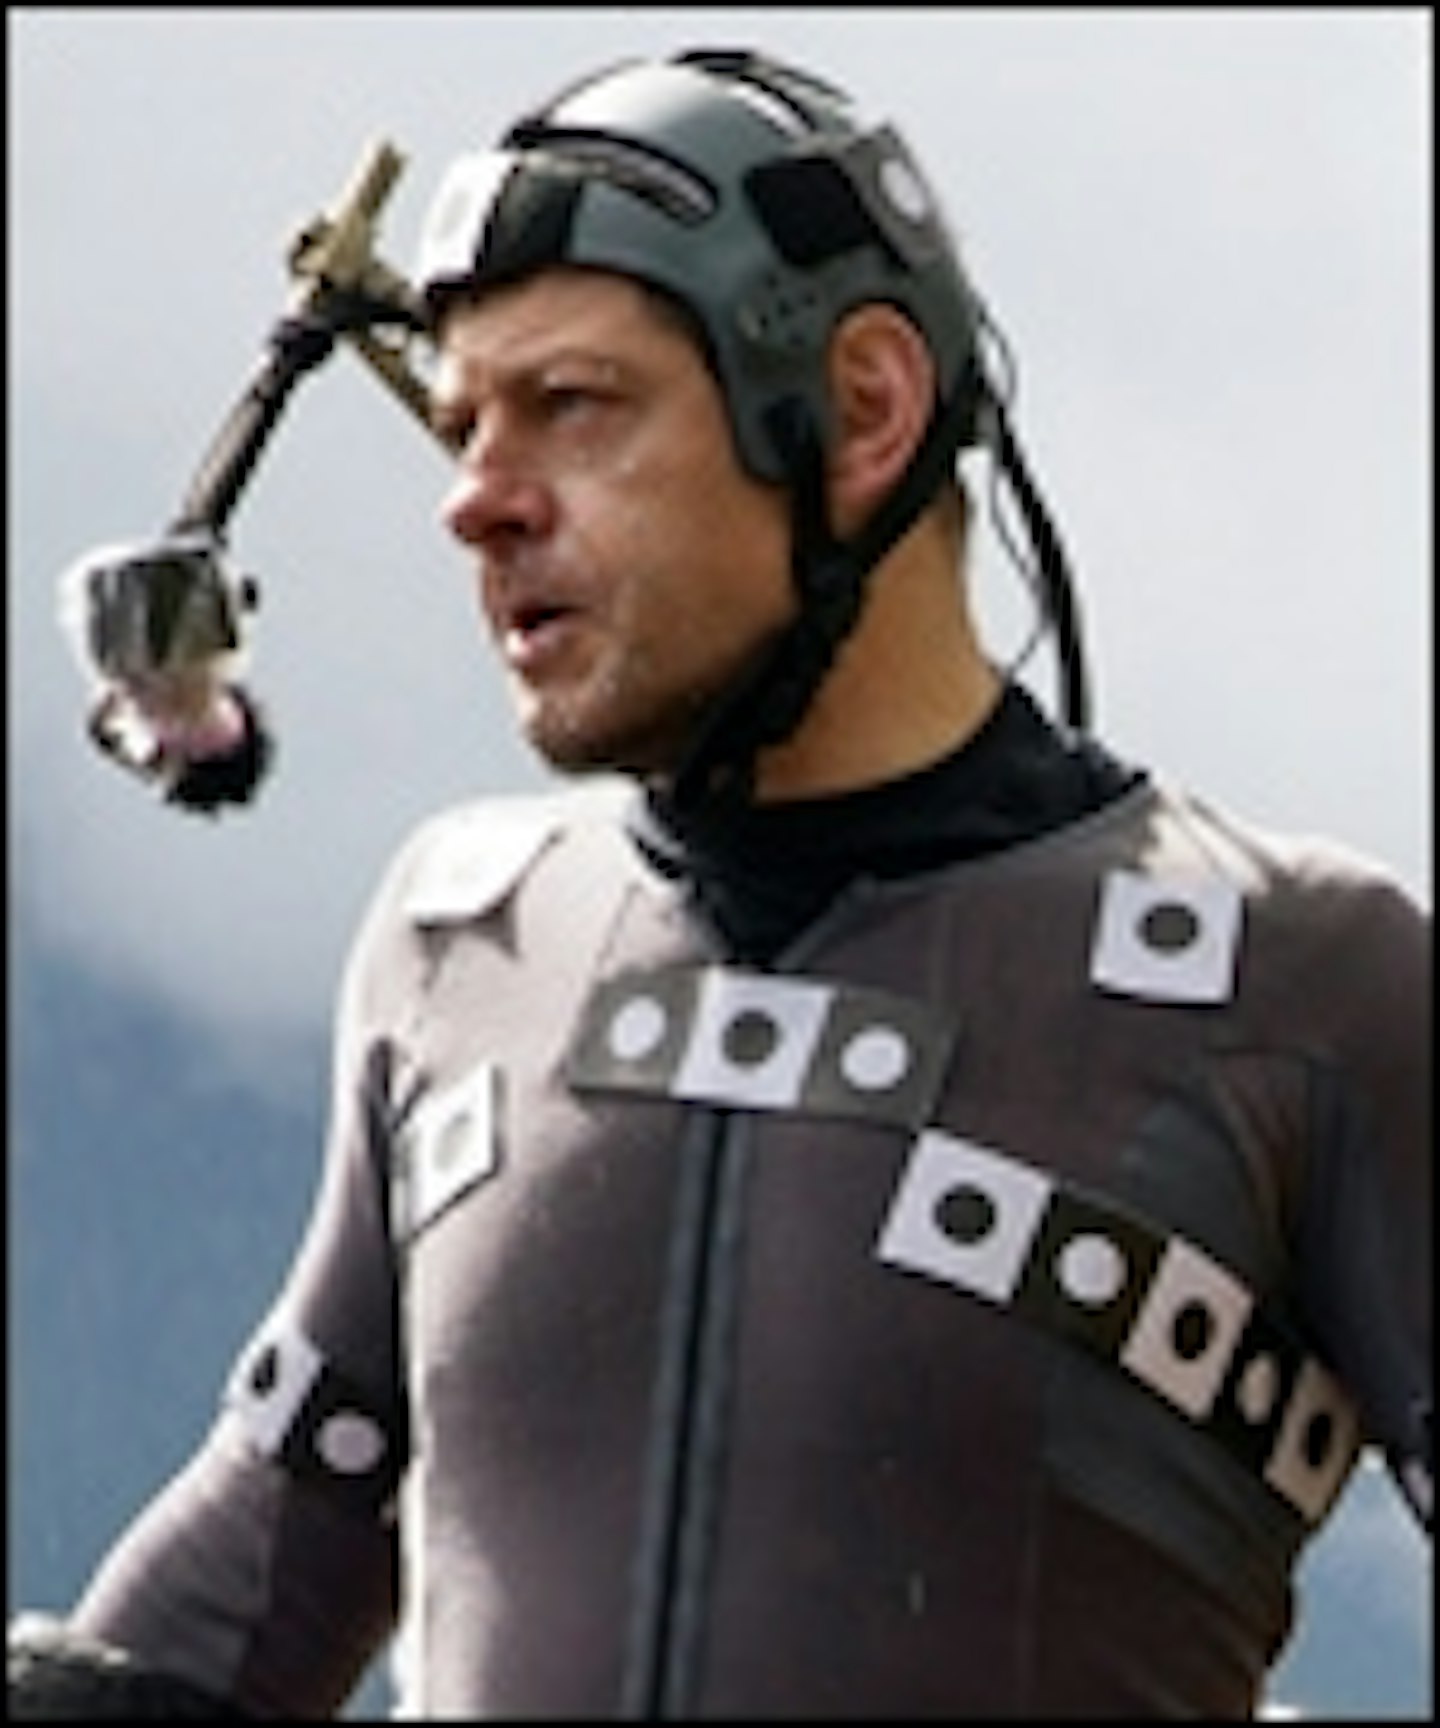 New Look At Andy Serkis In His Ape Suit